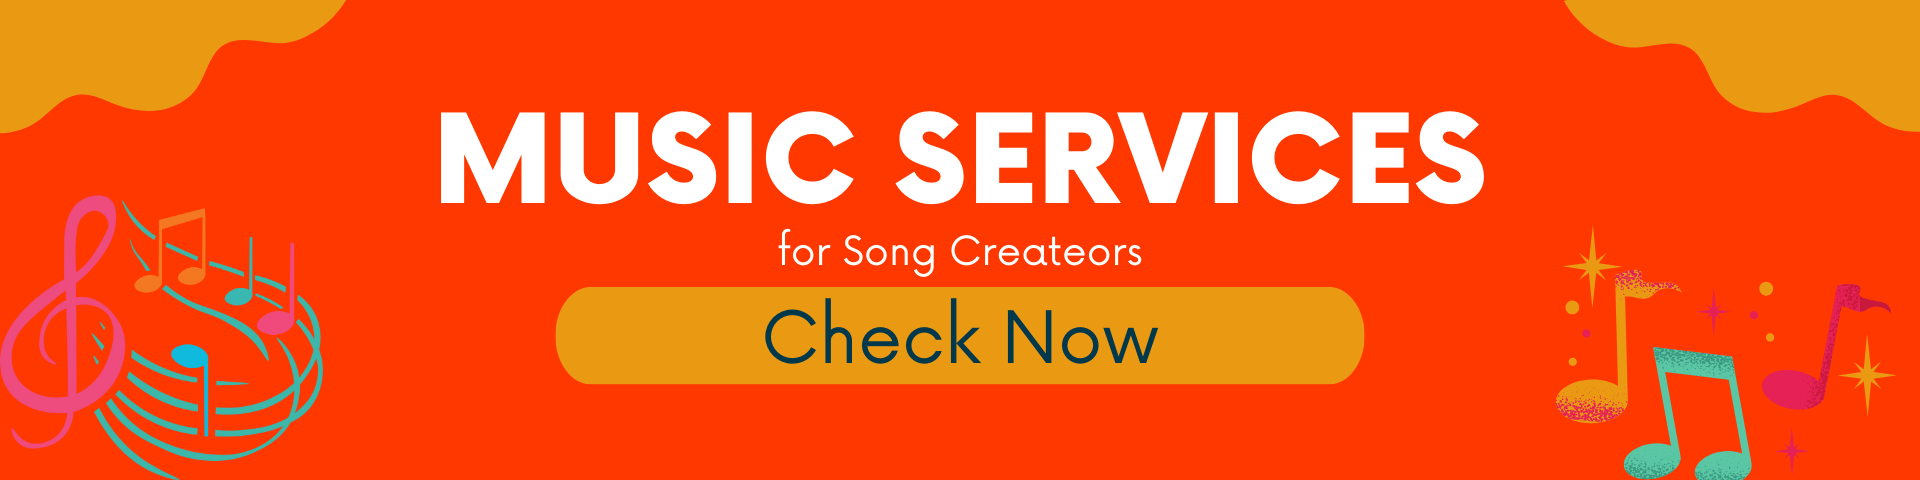 Music Services for Song Creators